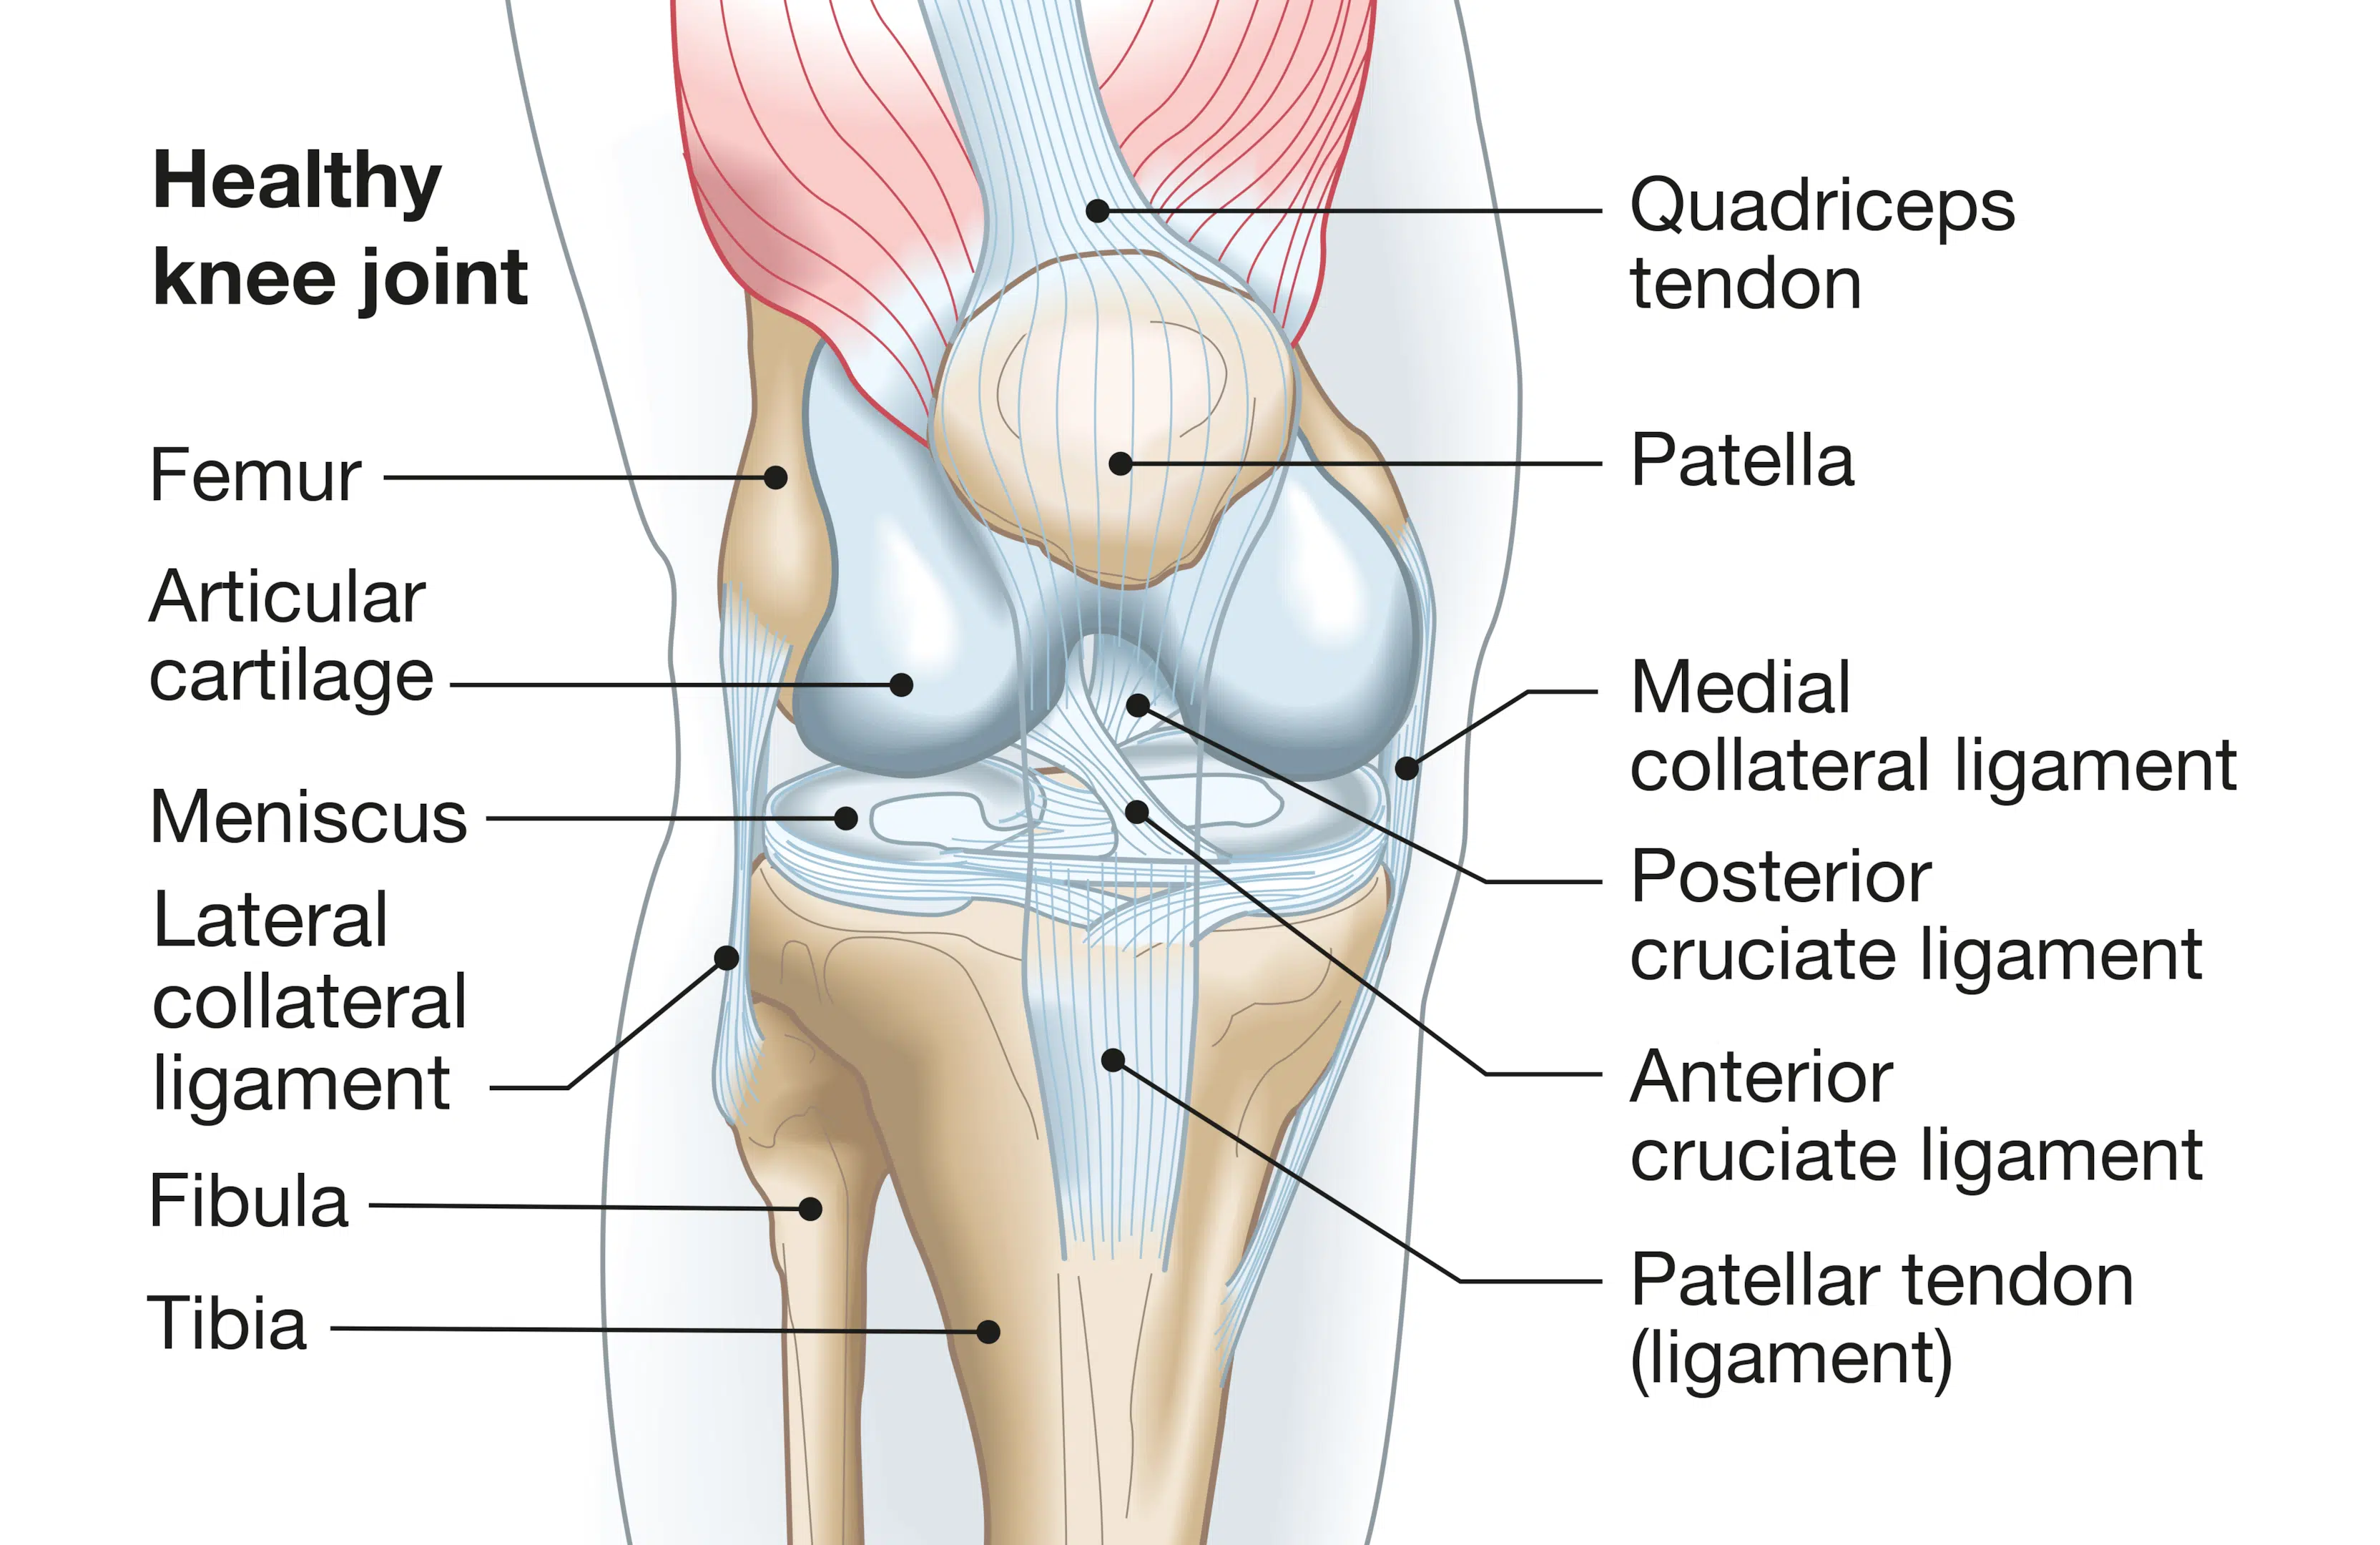 Inner knee pain: Treatment, exercises, and causes